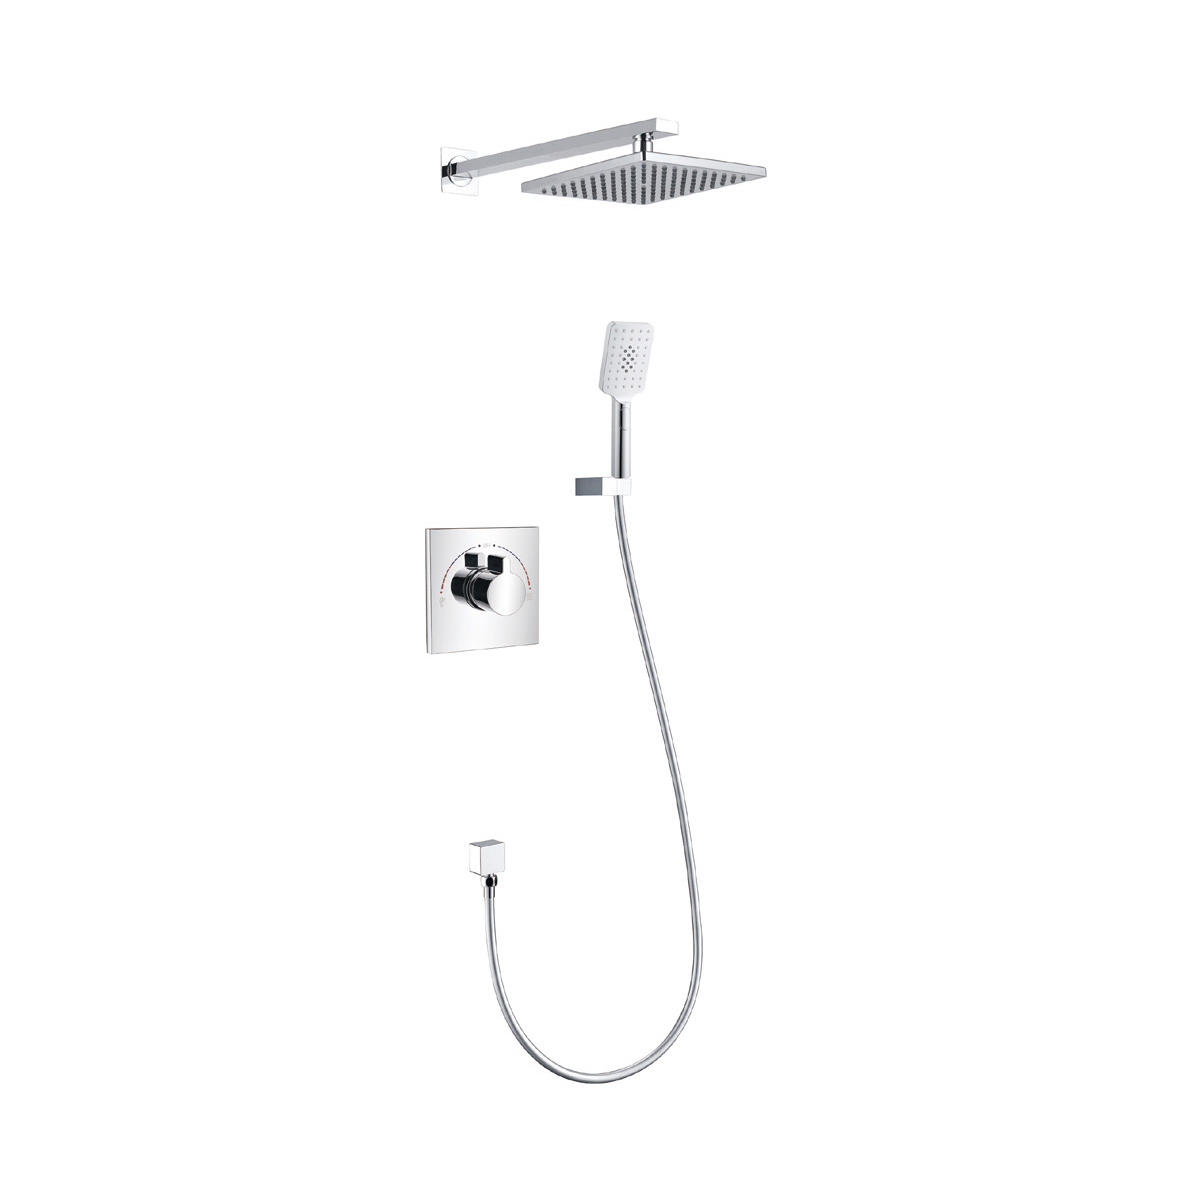 In-wall Shower Faucet AS-6023-1